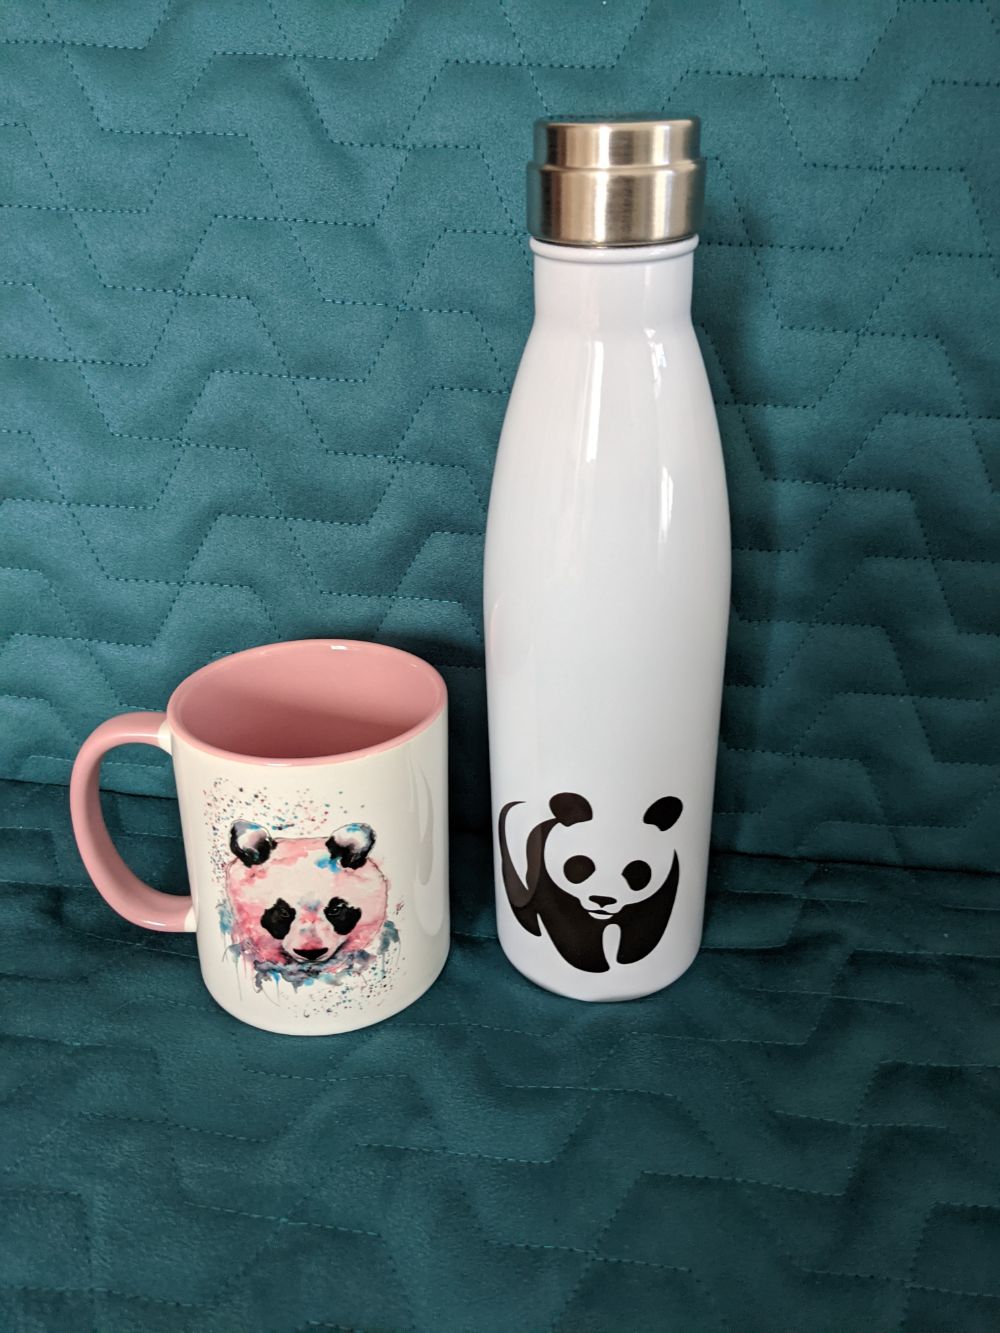 A painted pink-hued panda mug by Elizabeth Grant, and a vaccum bottle with the World Wildlife Fund panda logo on it